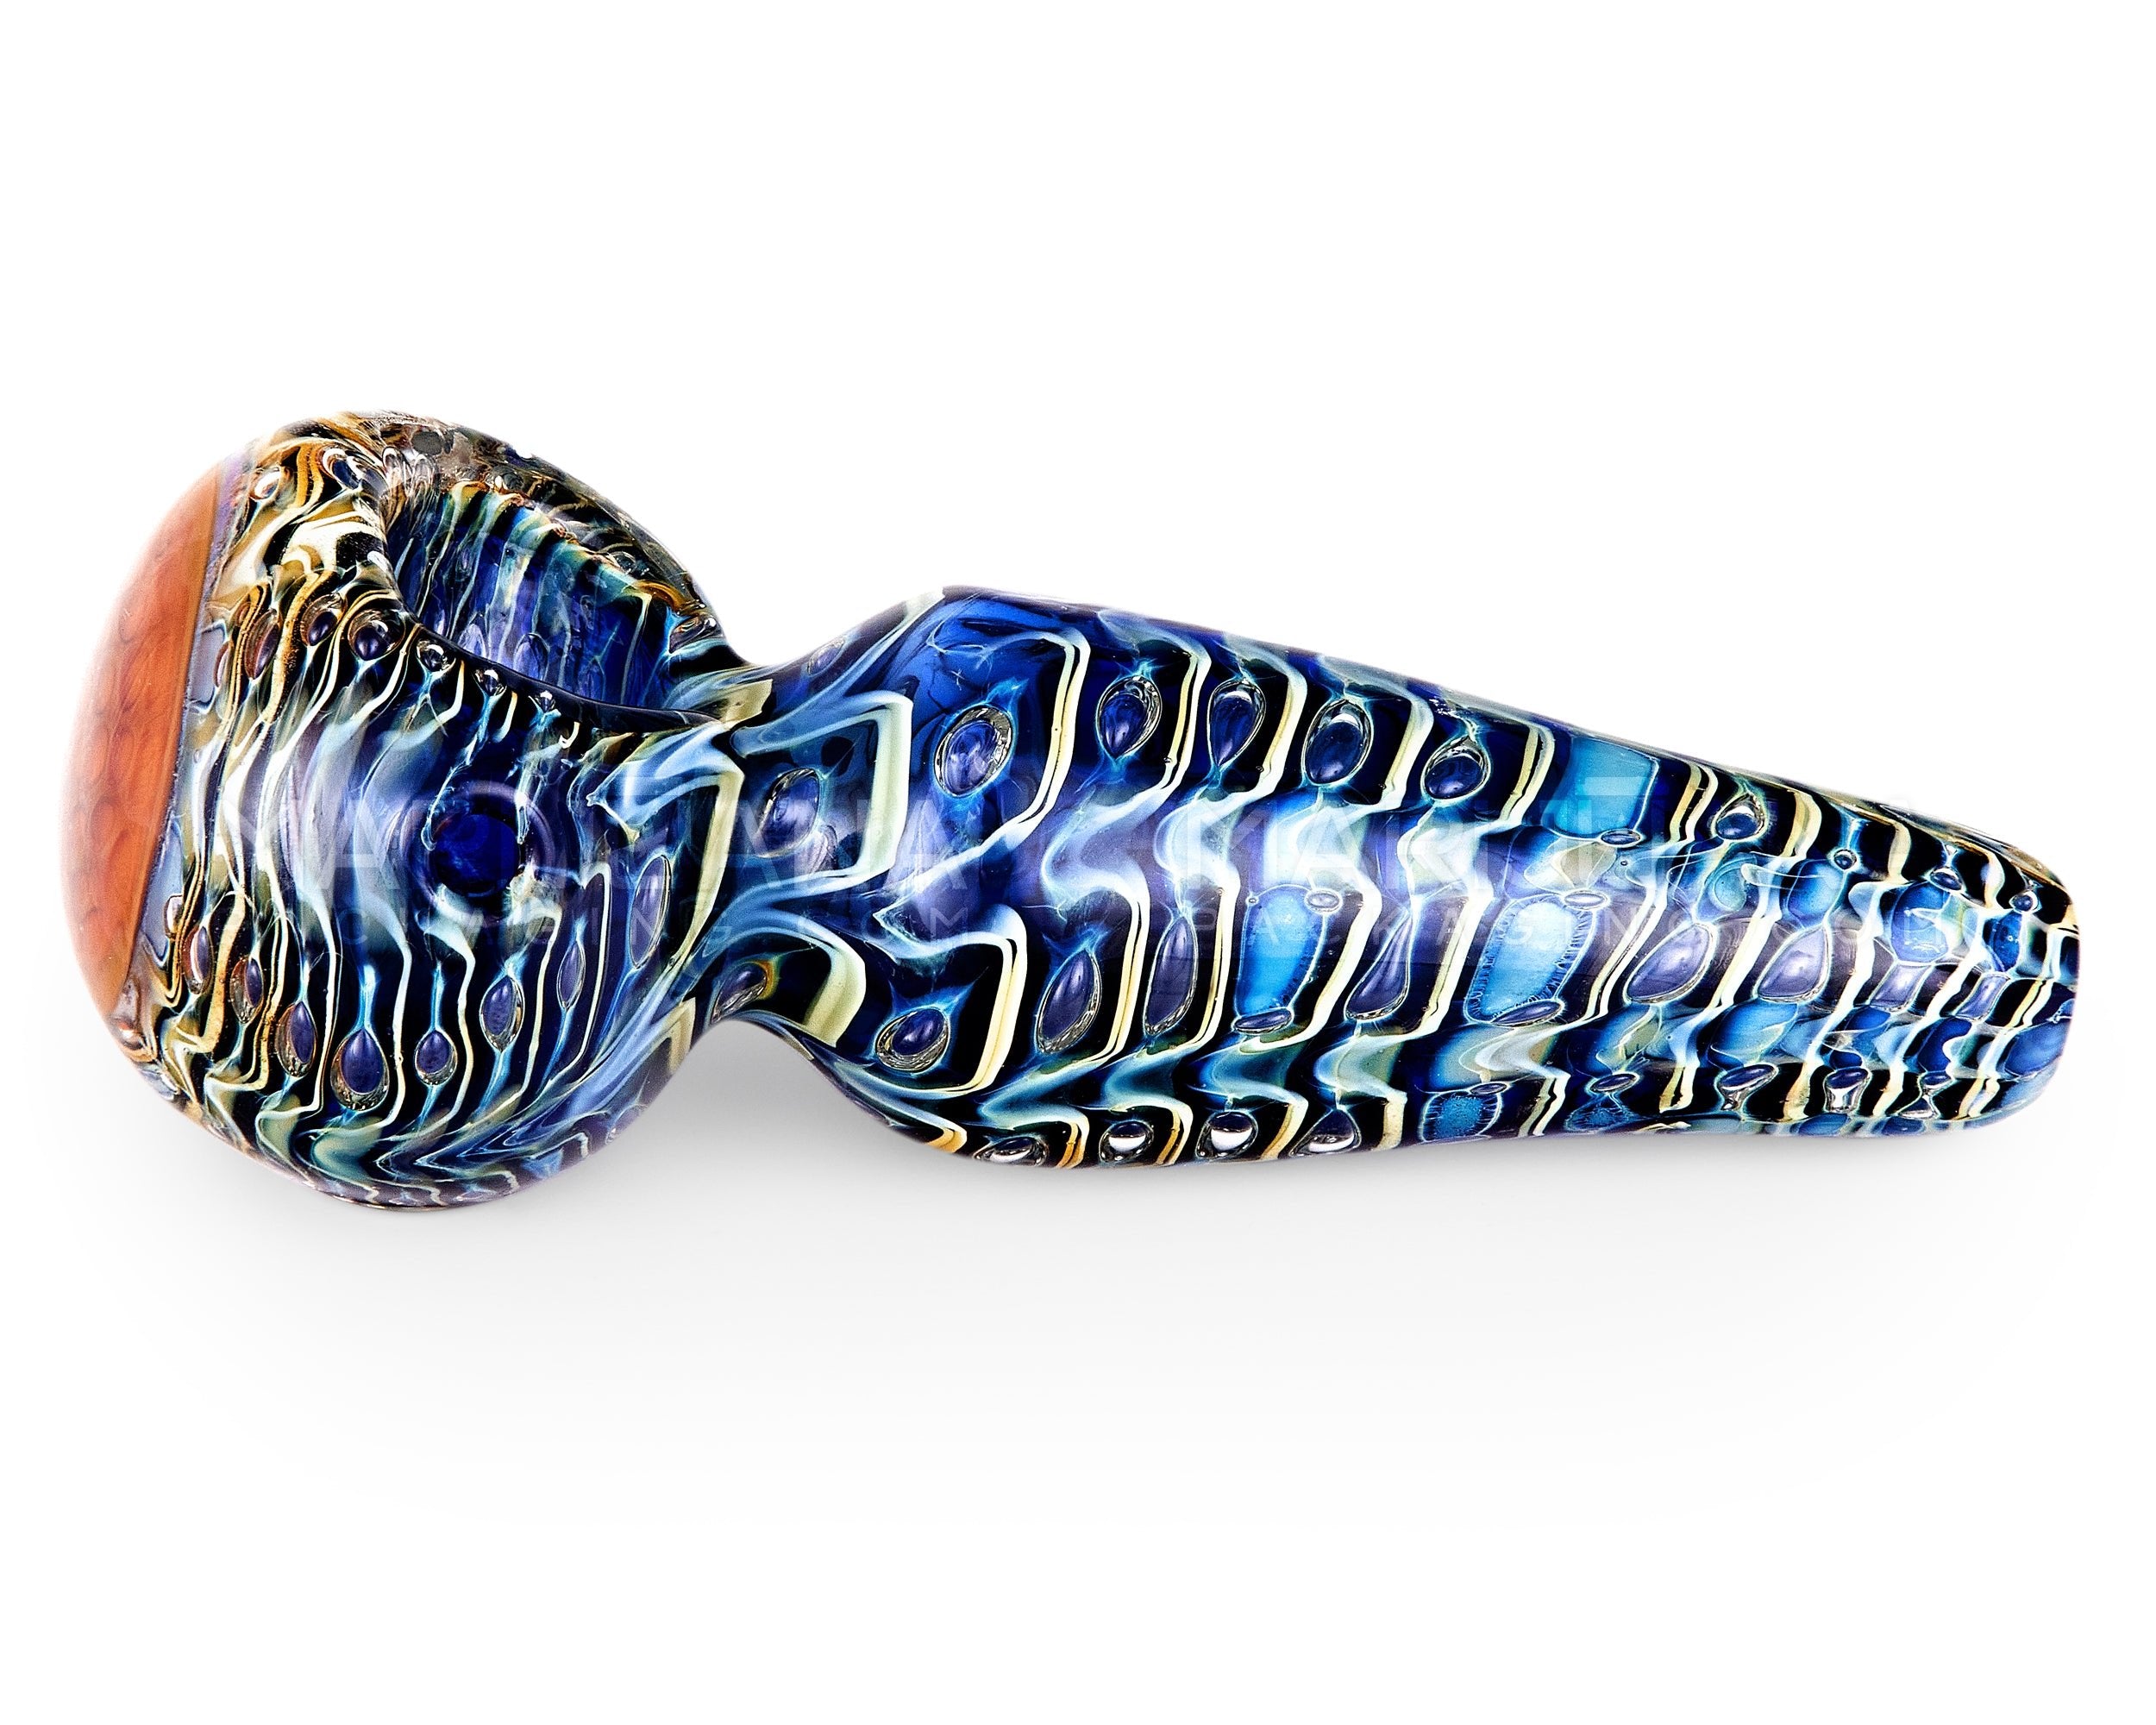 Raked & Bubble Trap Spoon Hand Pipe w/ Implosion Head | 5in Long - Thick Glass - Blue - 5